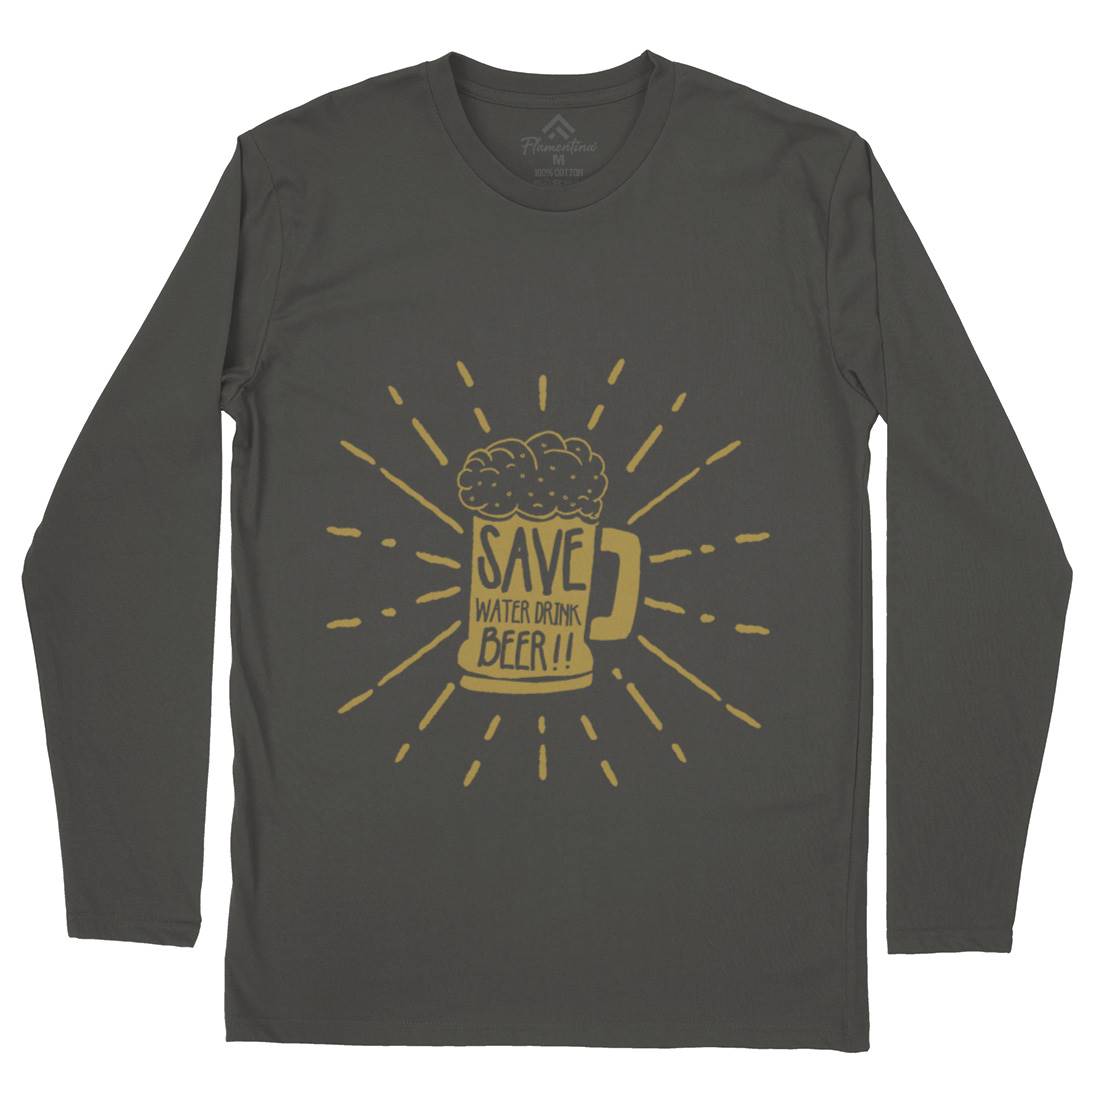 Save Water Mens Long Sleeve T-Shirt Drinks A368